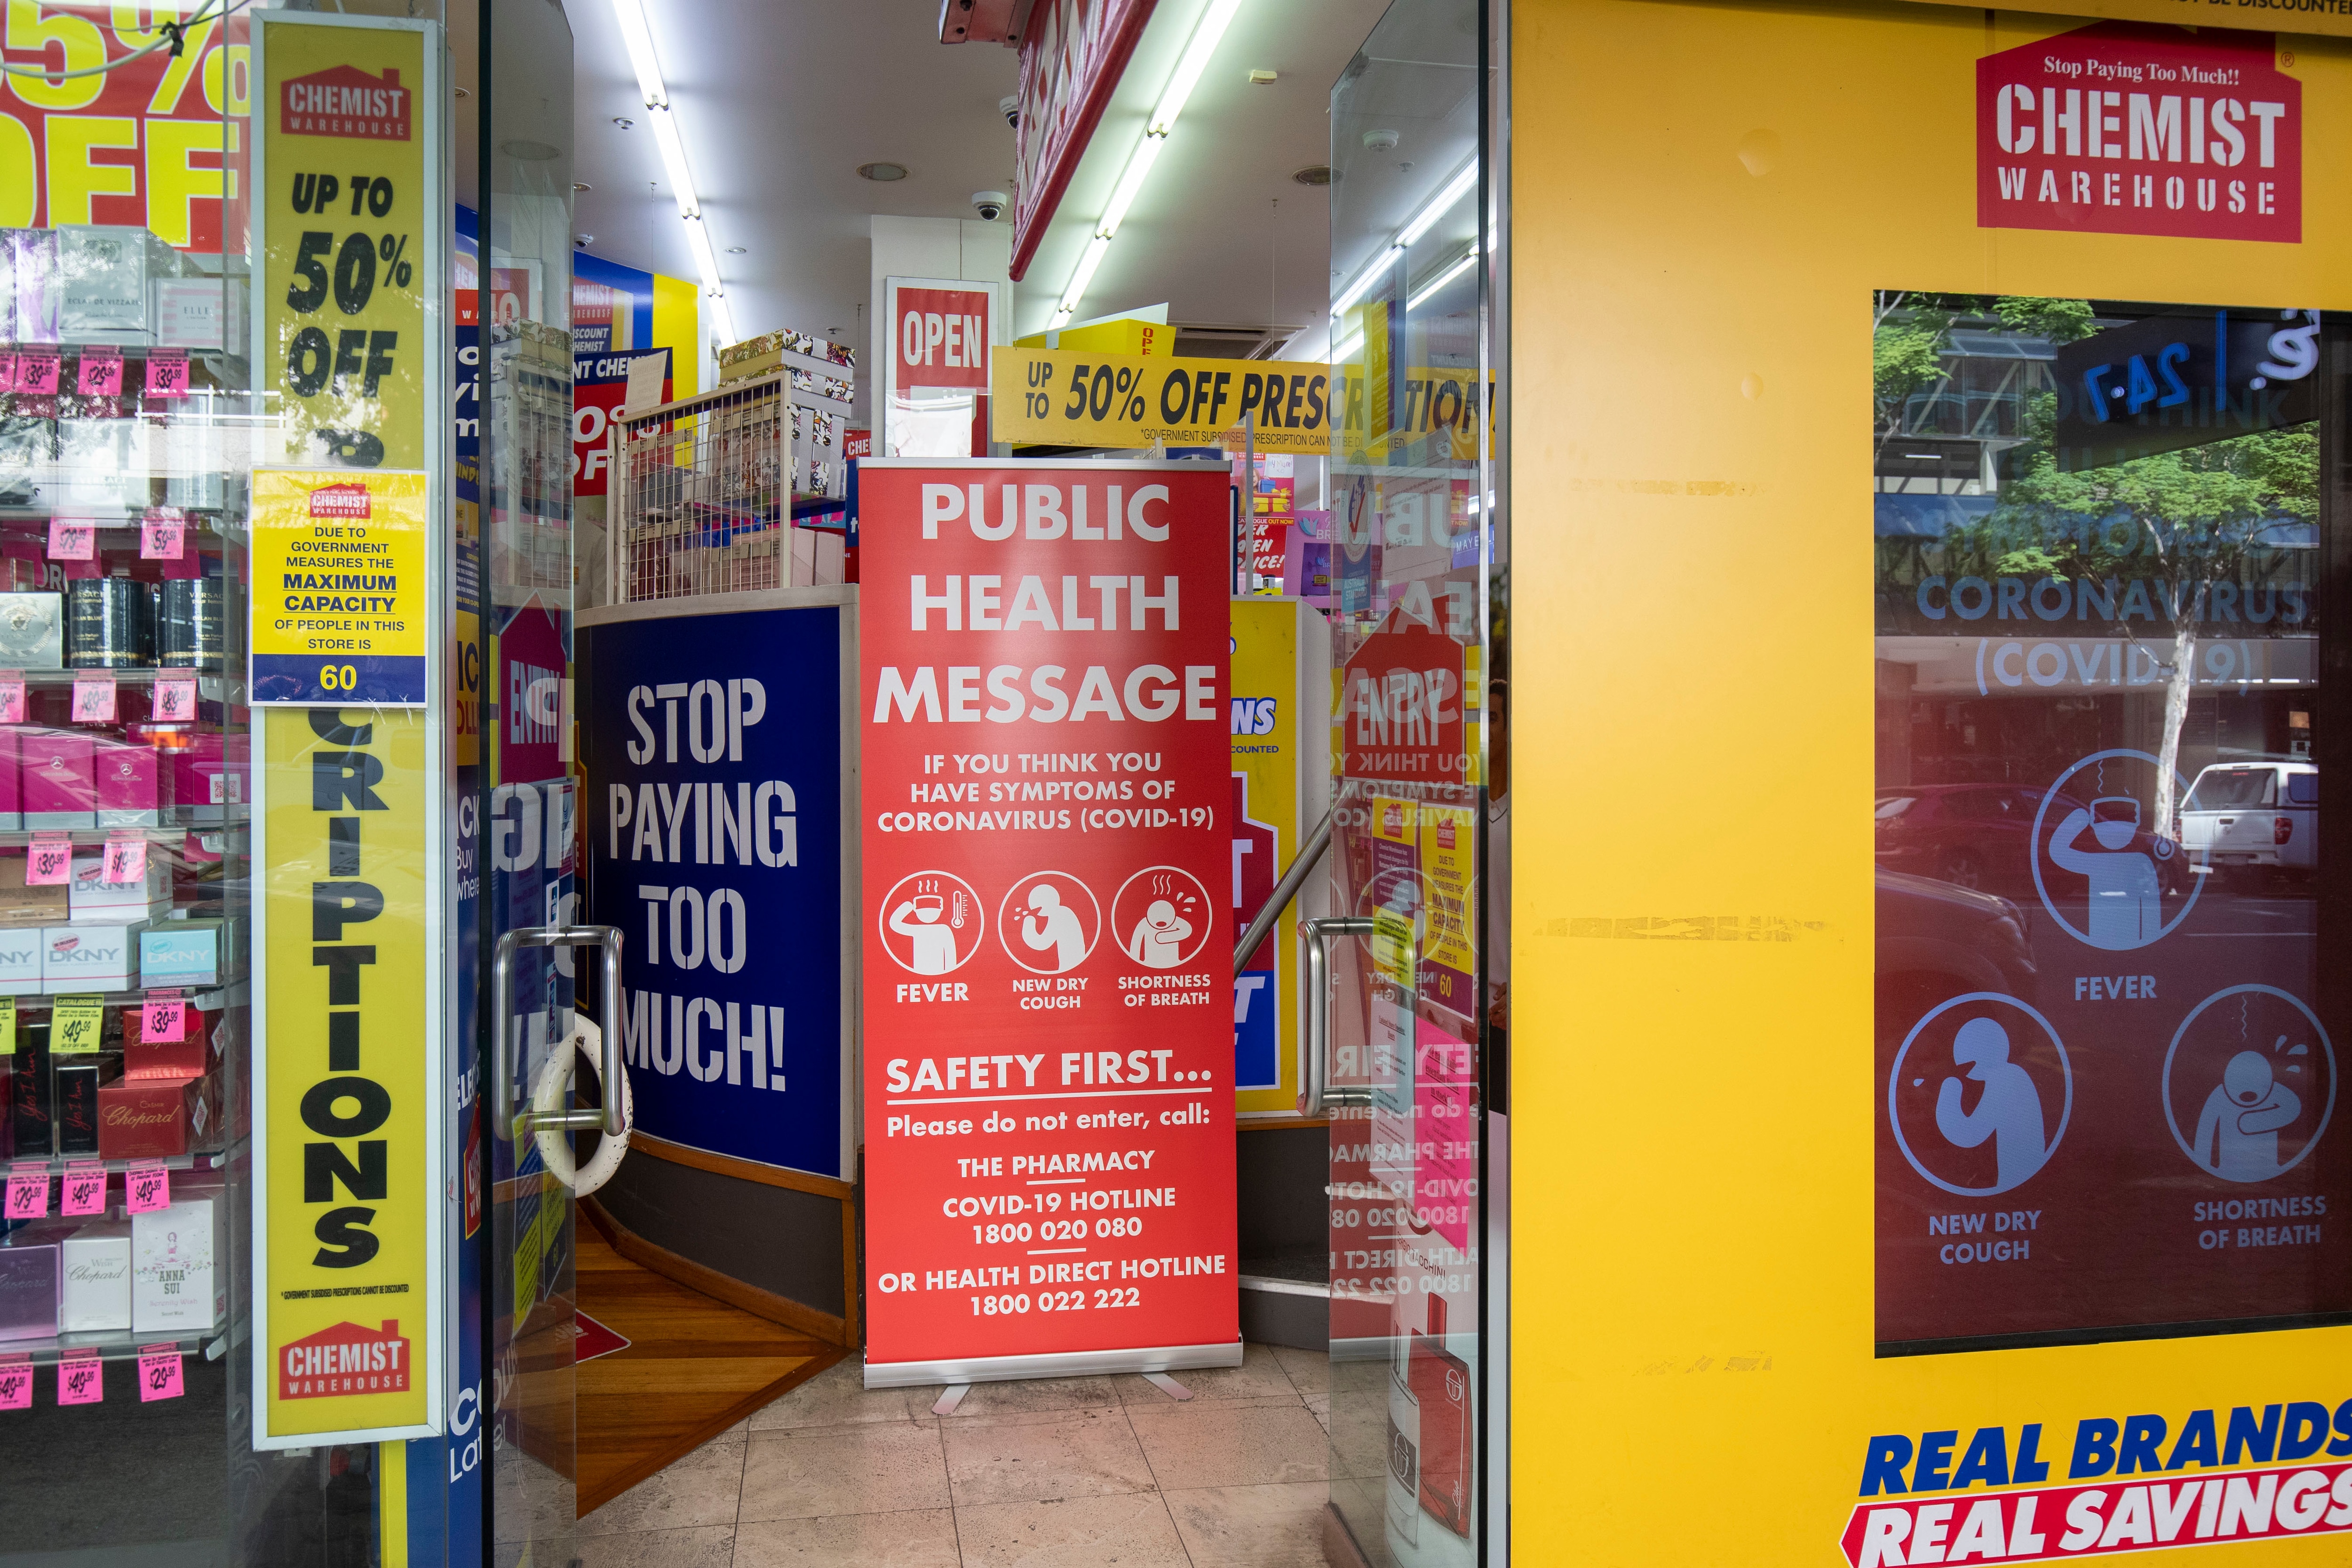 A Covid-19 public health message is seen at the entrance of a Chemist Warehouse in Brisbane, Friday, May 1, 2020. (AAP Image/Glenn Hunt) NO ARCHIVING